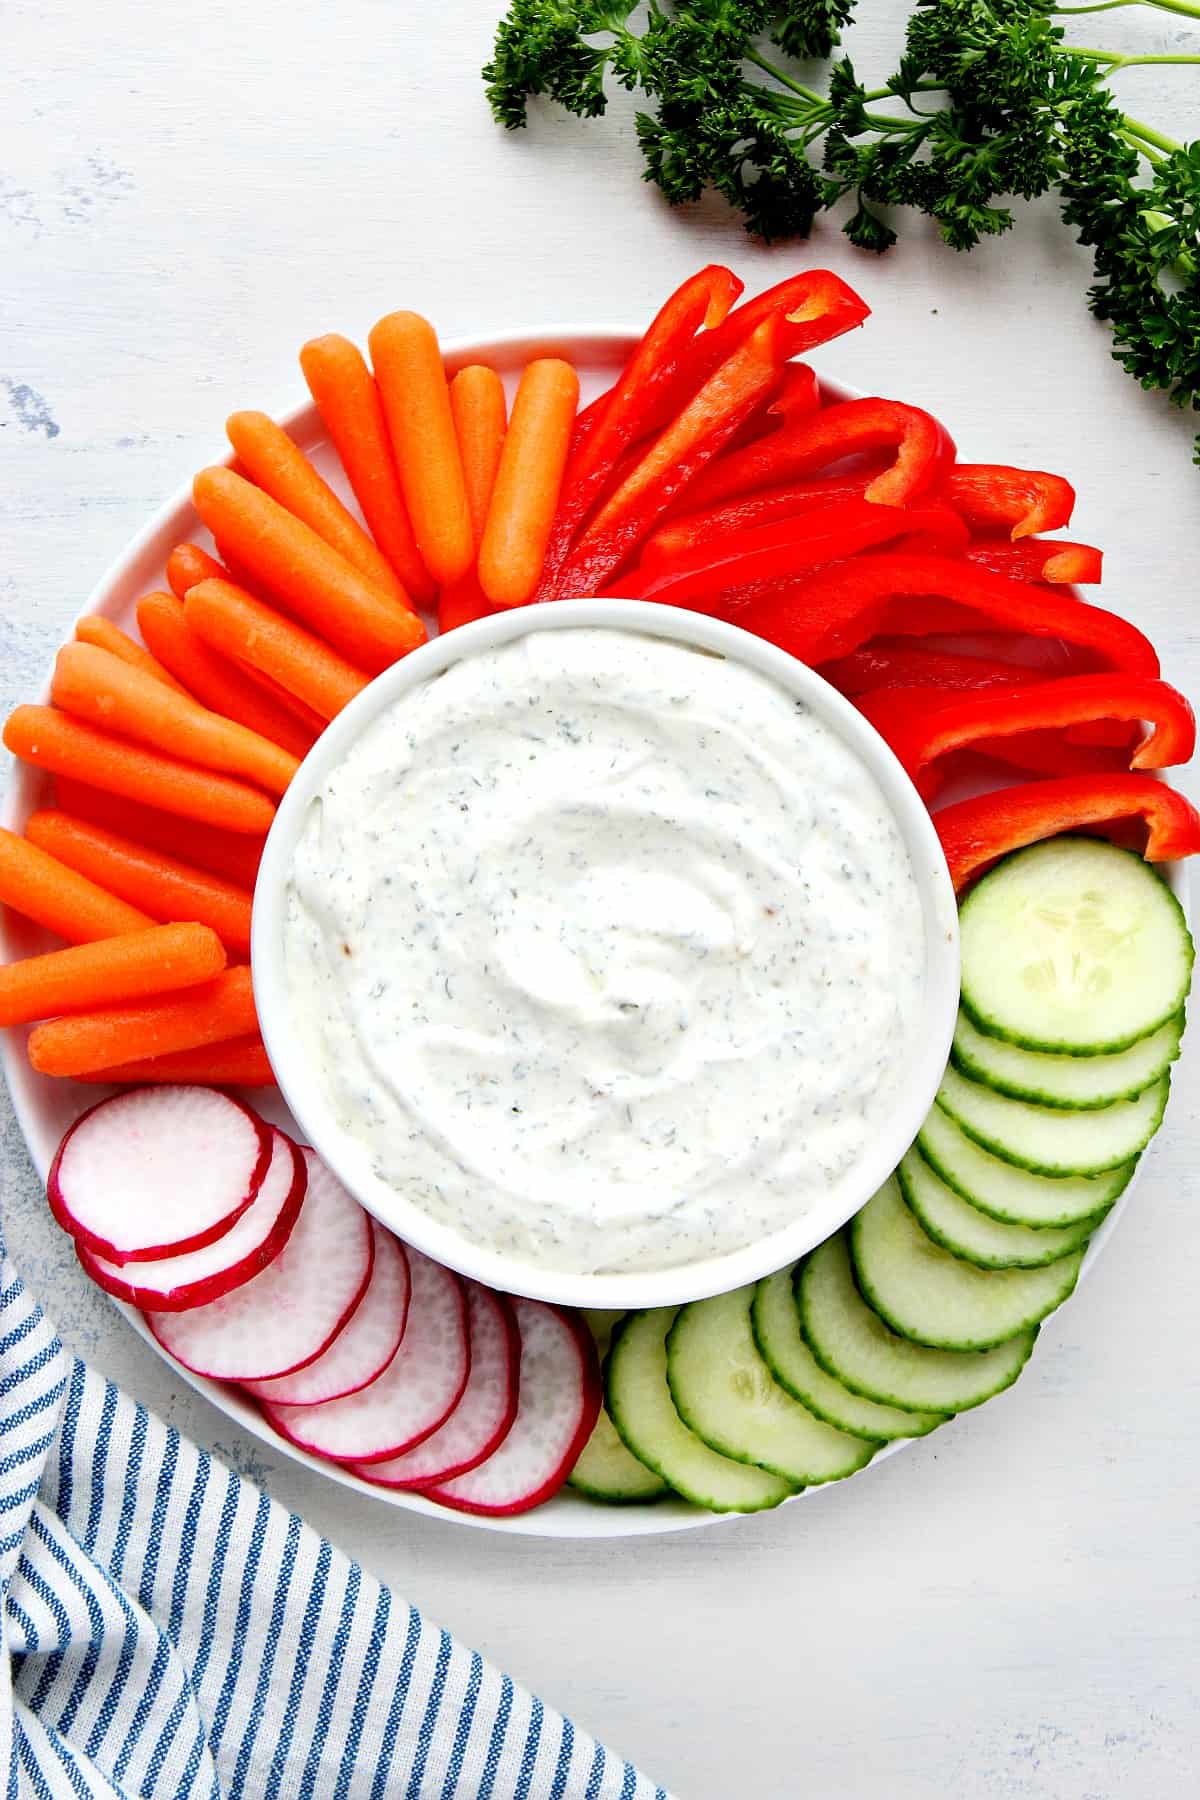 Dip with cut veggies on a plate.